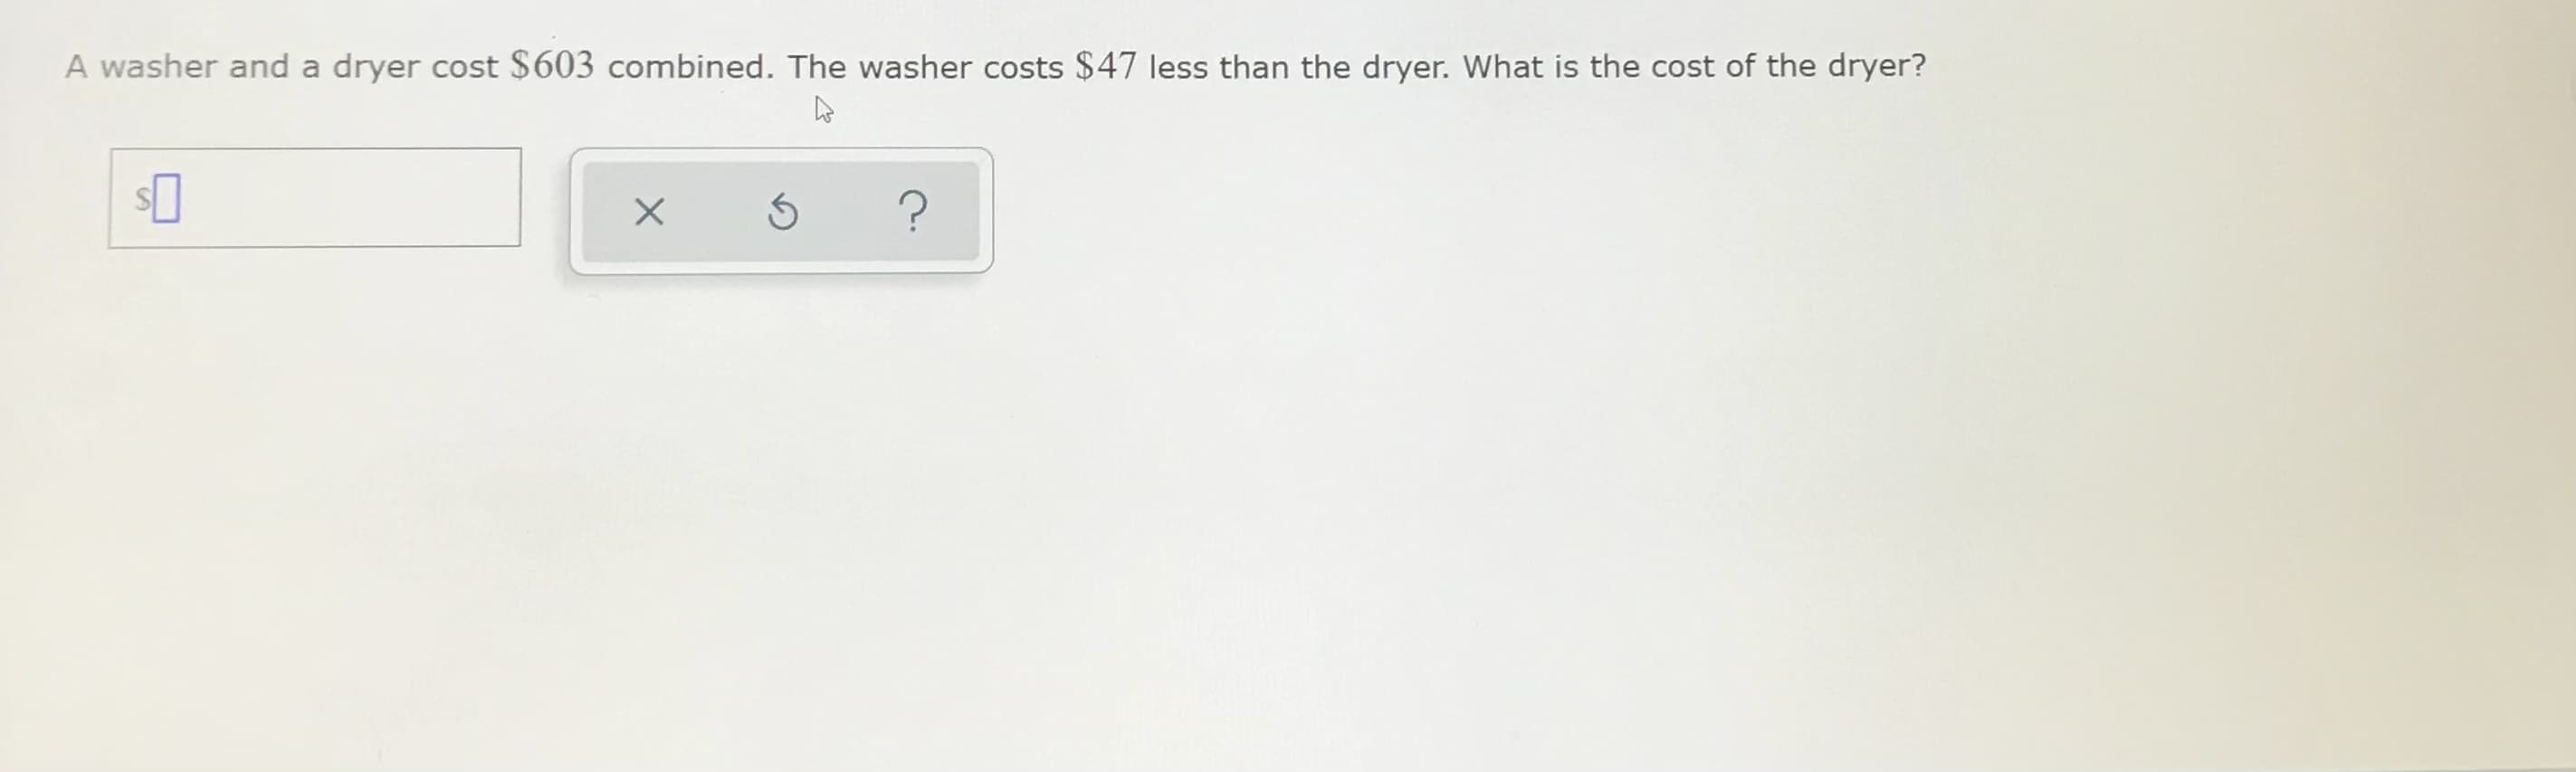 A washer and a dryer cost $603 combined. The washer costs $47 less than the dryer. What is the cost of the dryer?
